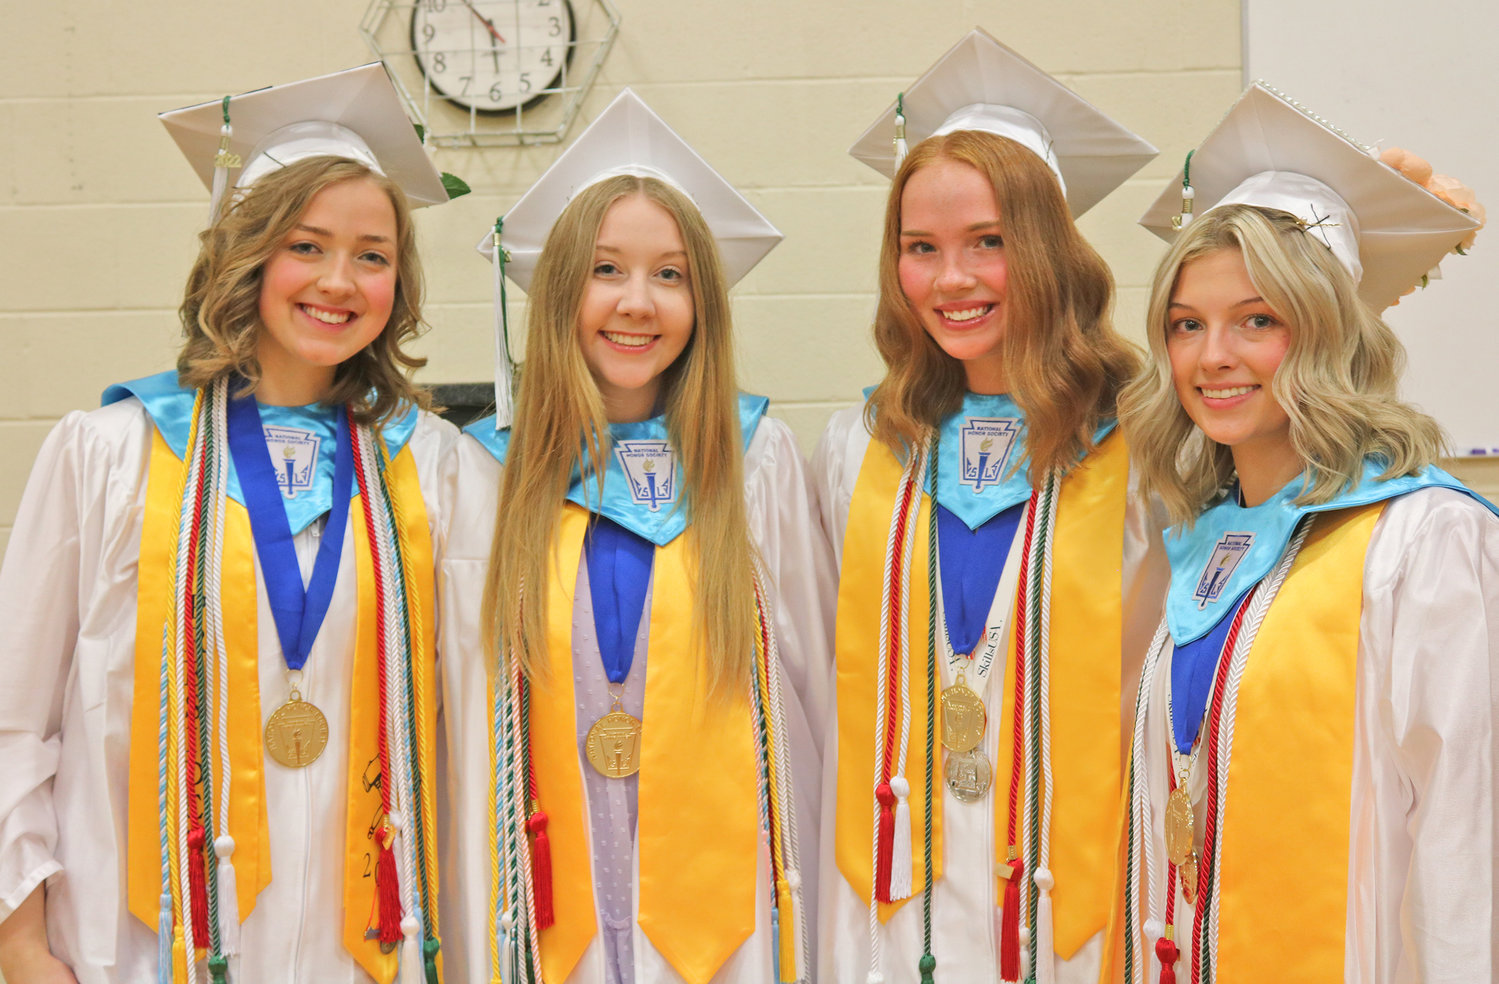 WILDCAT OFFICERS — Class of 2022 officers get ready to bid farewell to their days as students at Adironack High School. From left: Isabella Miller, president; Sarah Wiedmer, vice president; Kaitlin Gallo, secretary; and Rachel Bellinger, treasurer.